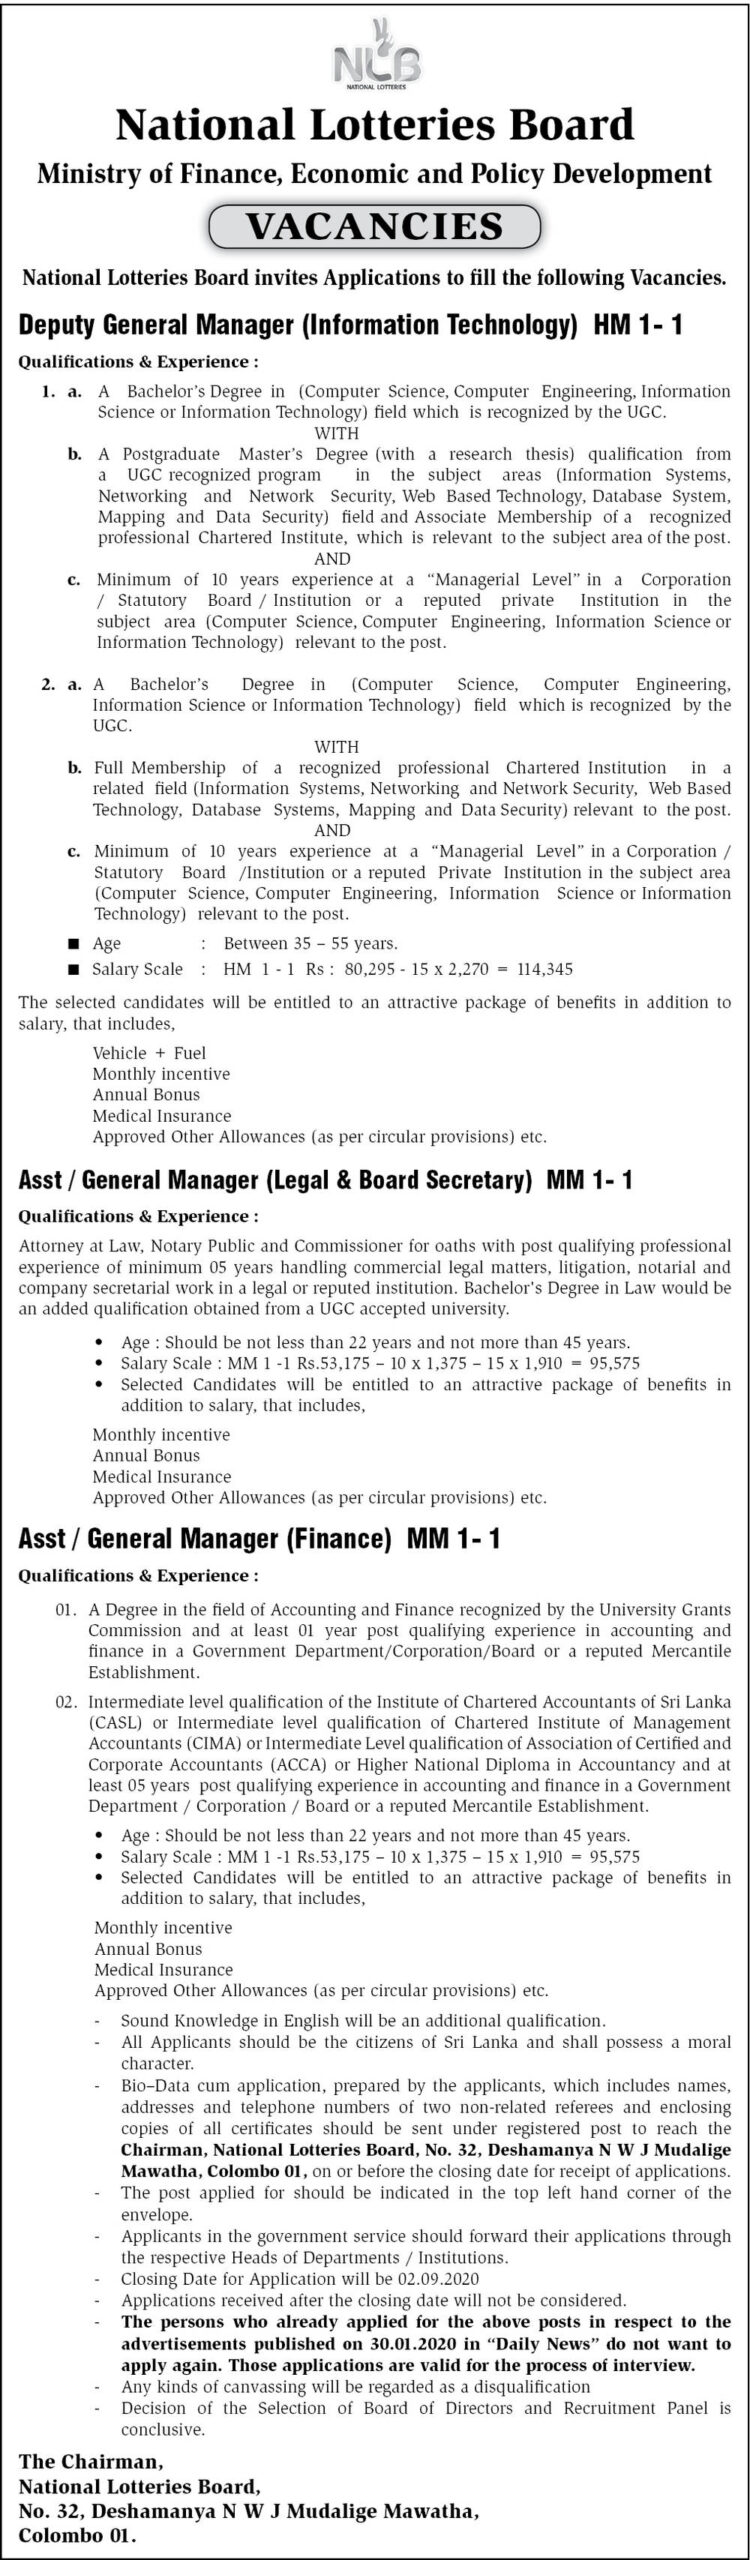 Deputy General Manager (Information Technology), Assistant General Manager (Legal and Board Secretary / Finance) – National Lotteries Board 2